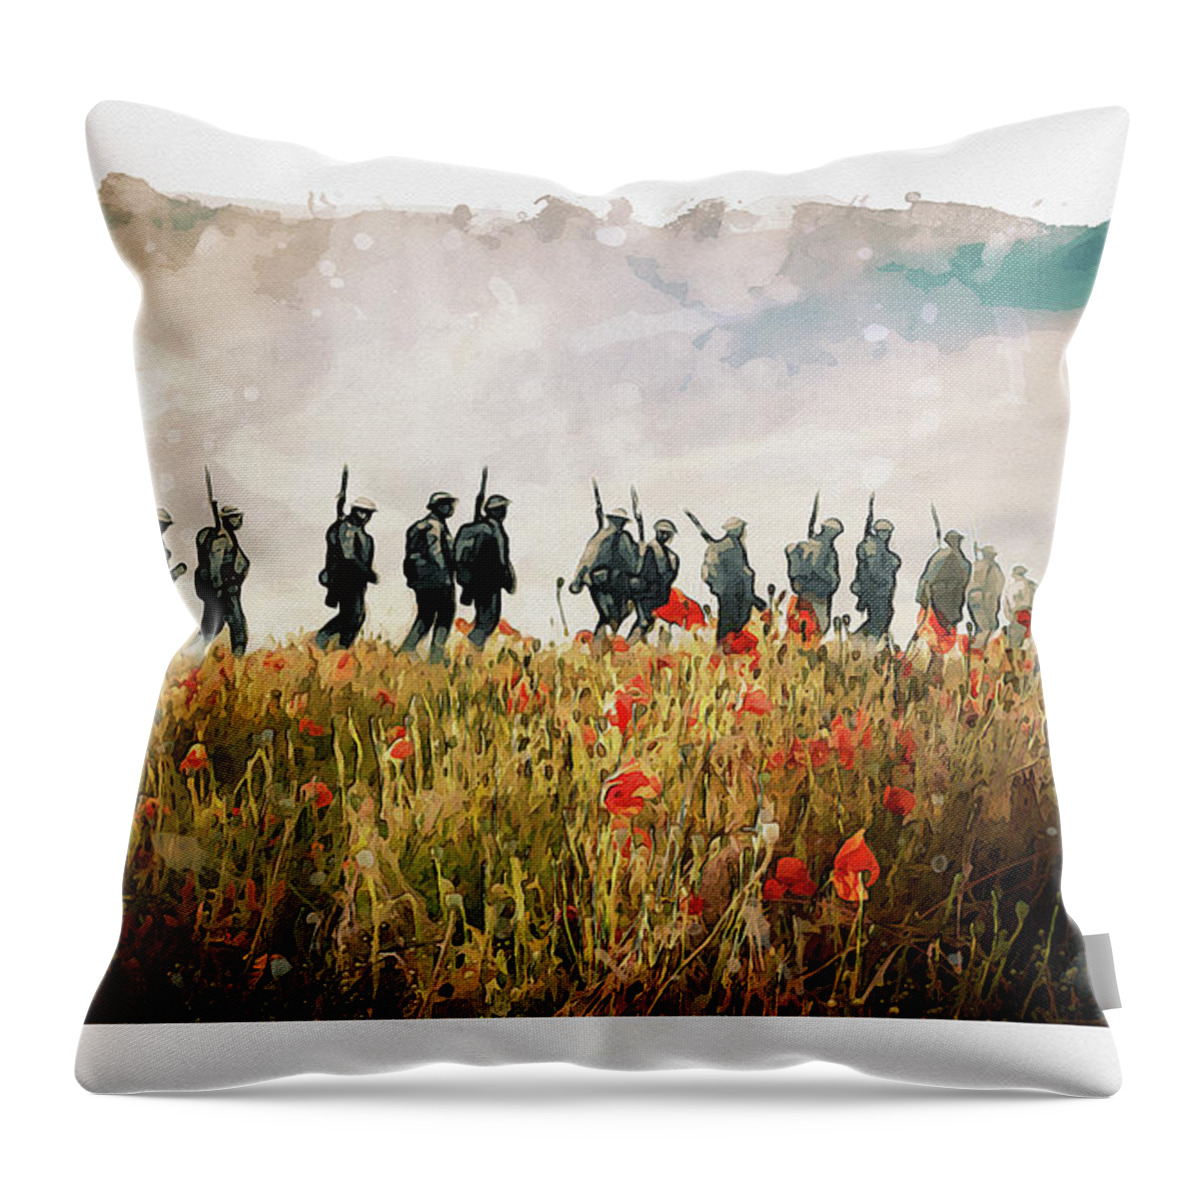 Soldiers And Poppies Throw Pillow featuring the digital art The Last March by Airpower Art